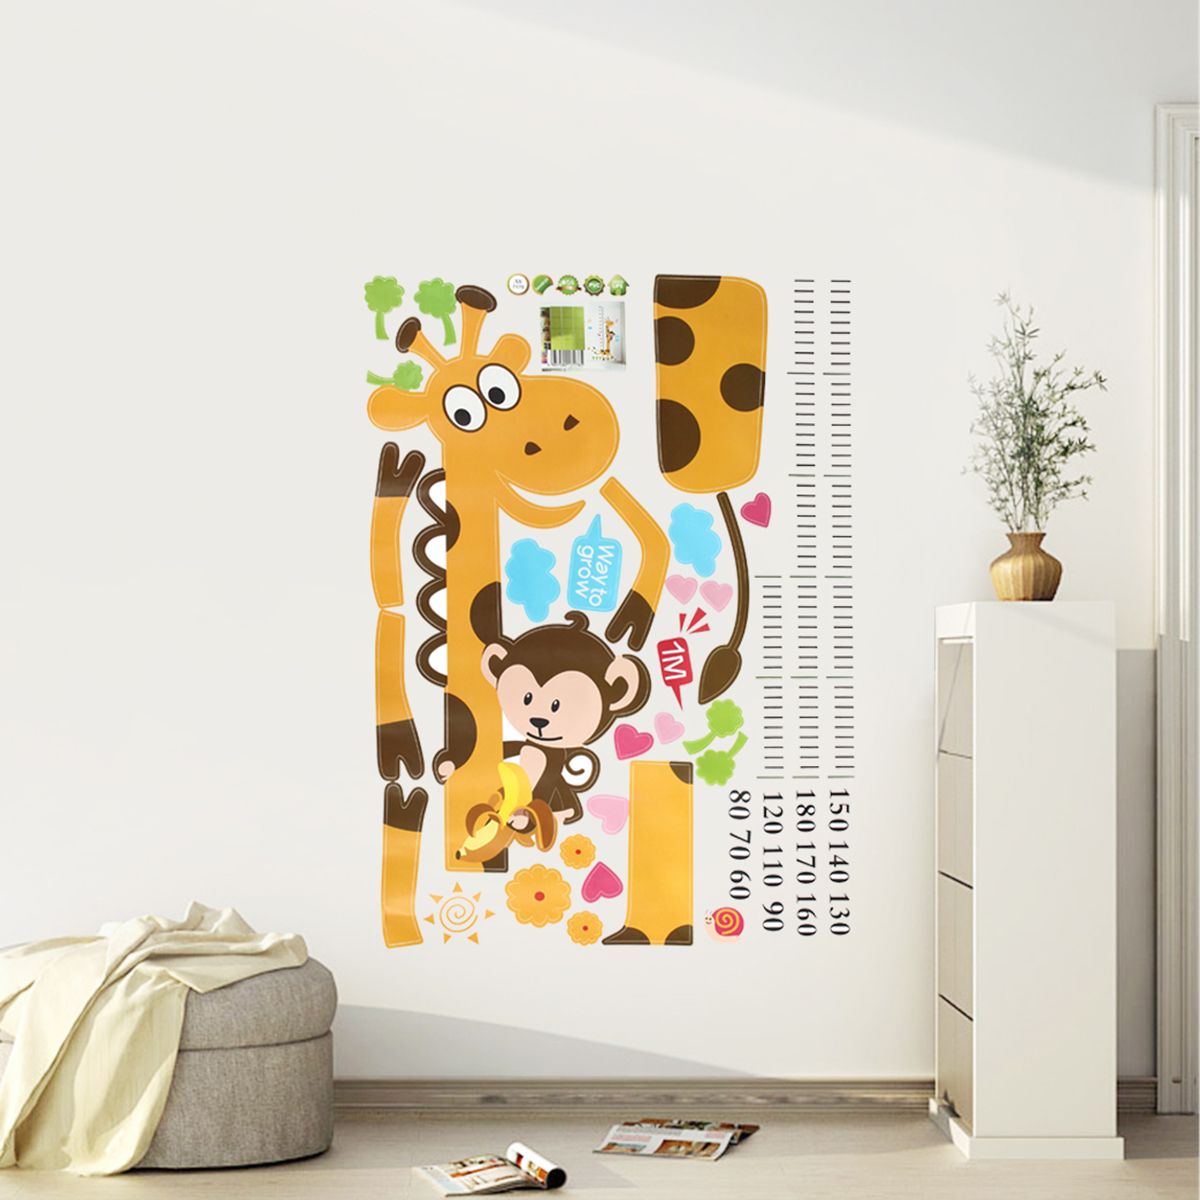 Removable-Height-Chart-Measure-Wall-Sticker-Giraffe-Decal-for-Kids-Baby-Room-1557067